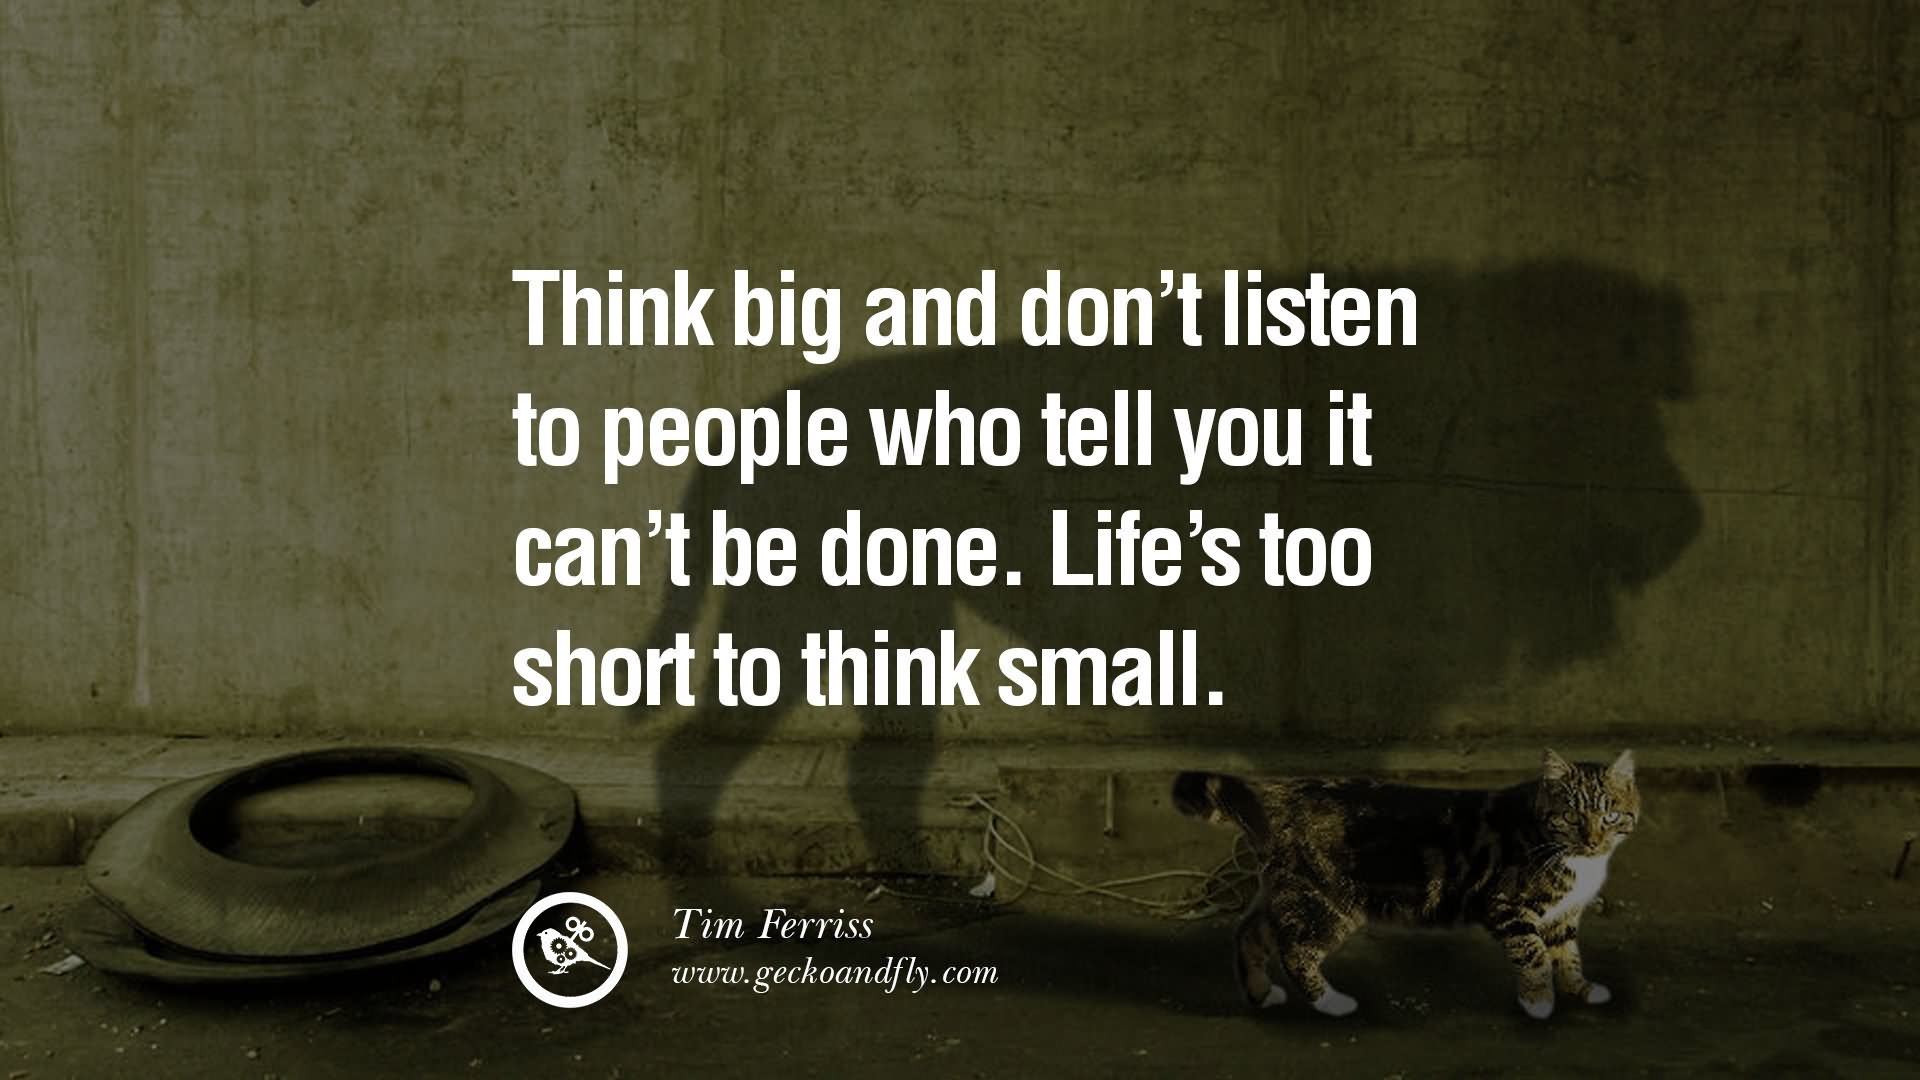 Think big and don't listen to people who tell you it can't be done. Life's too short to think small.